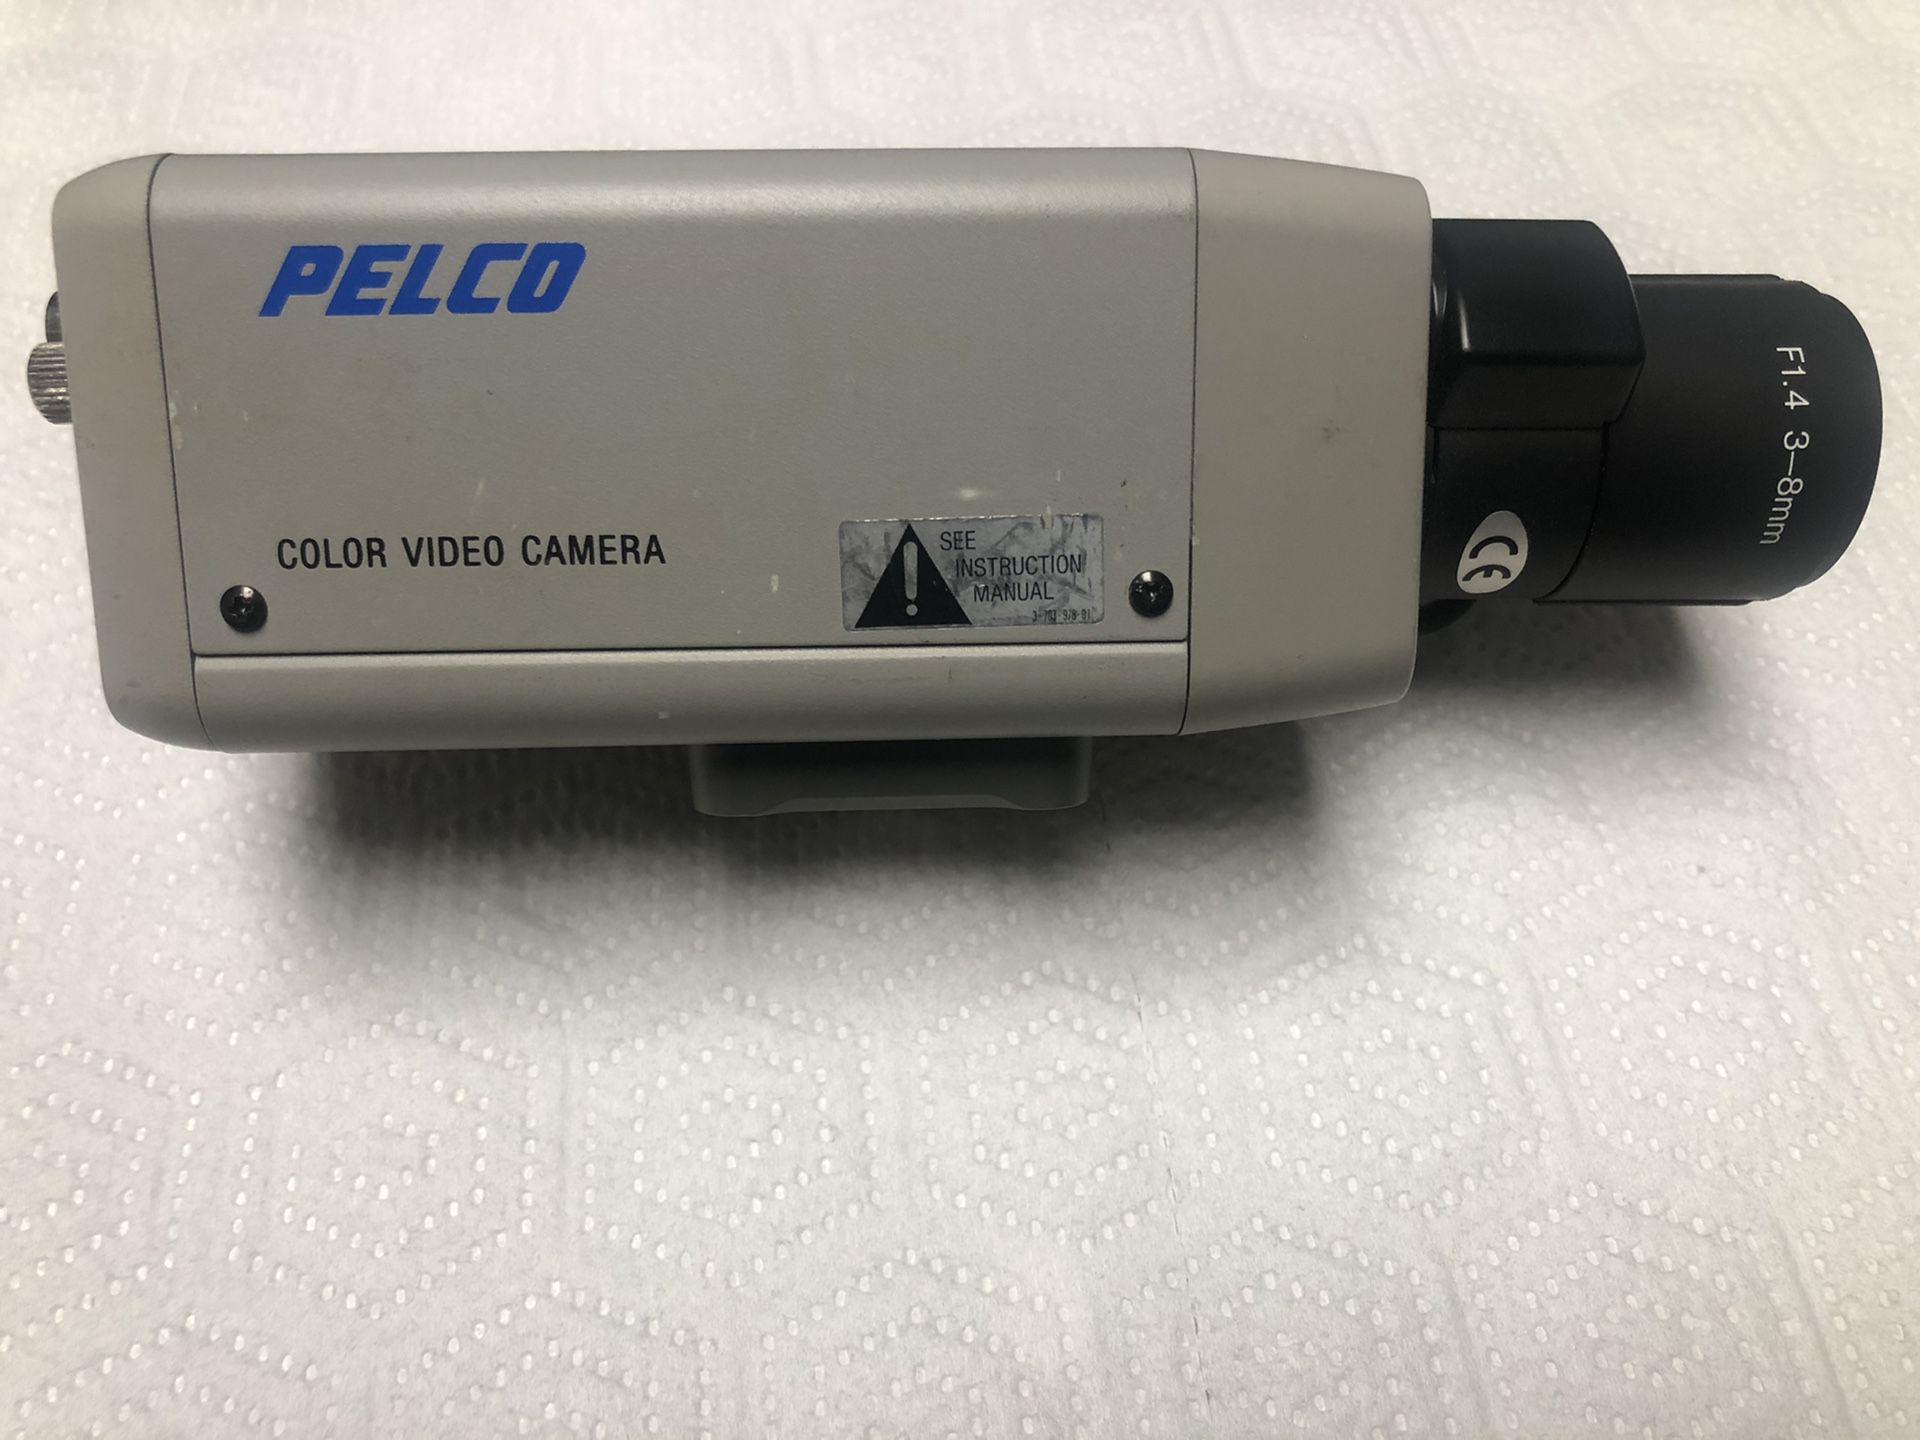 PELCO Color Video Security Camera made by SONY